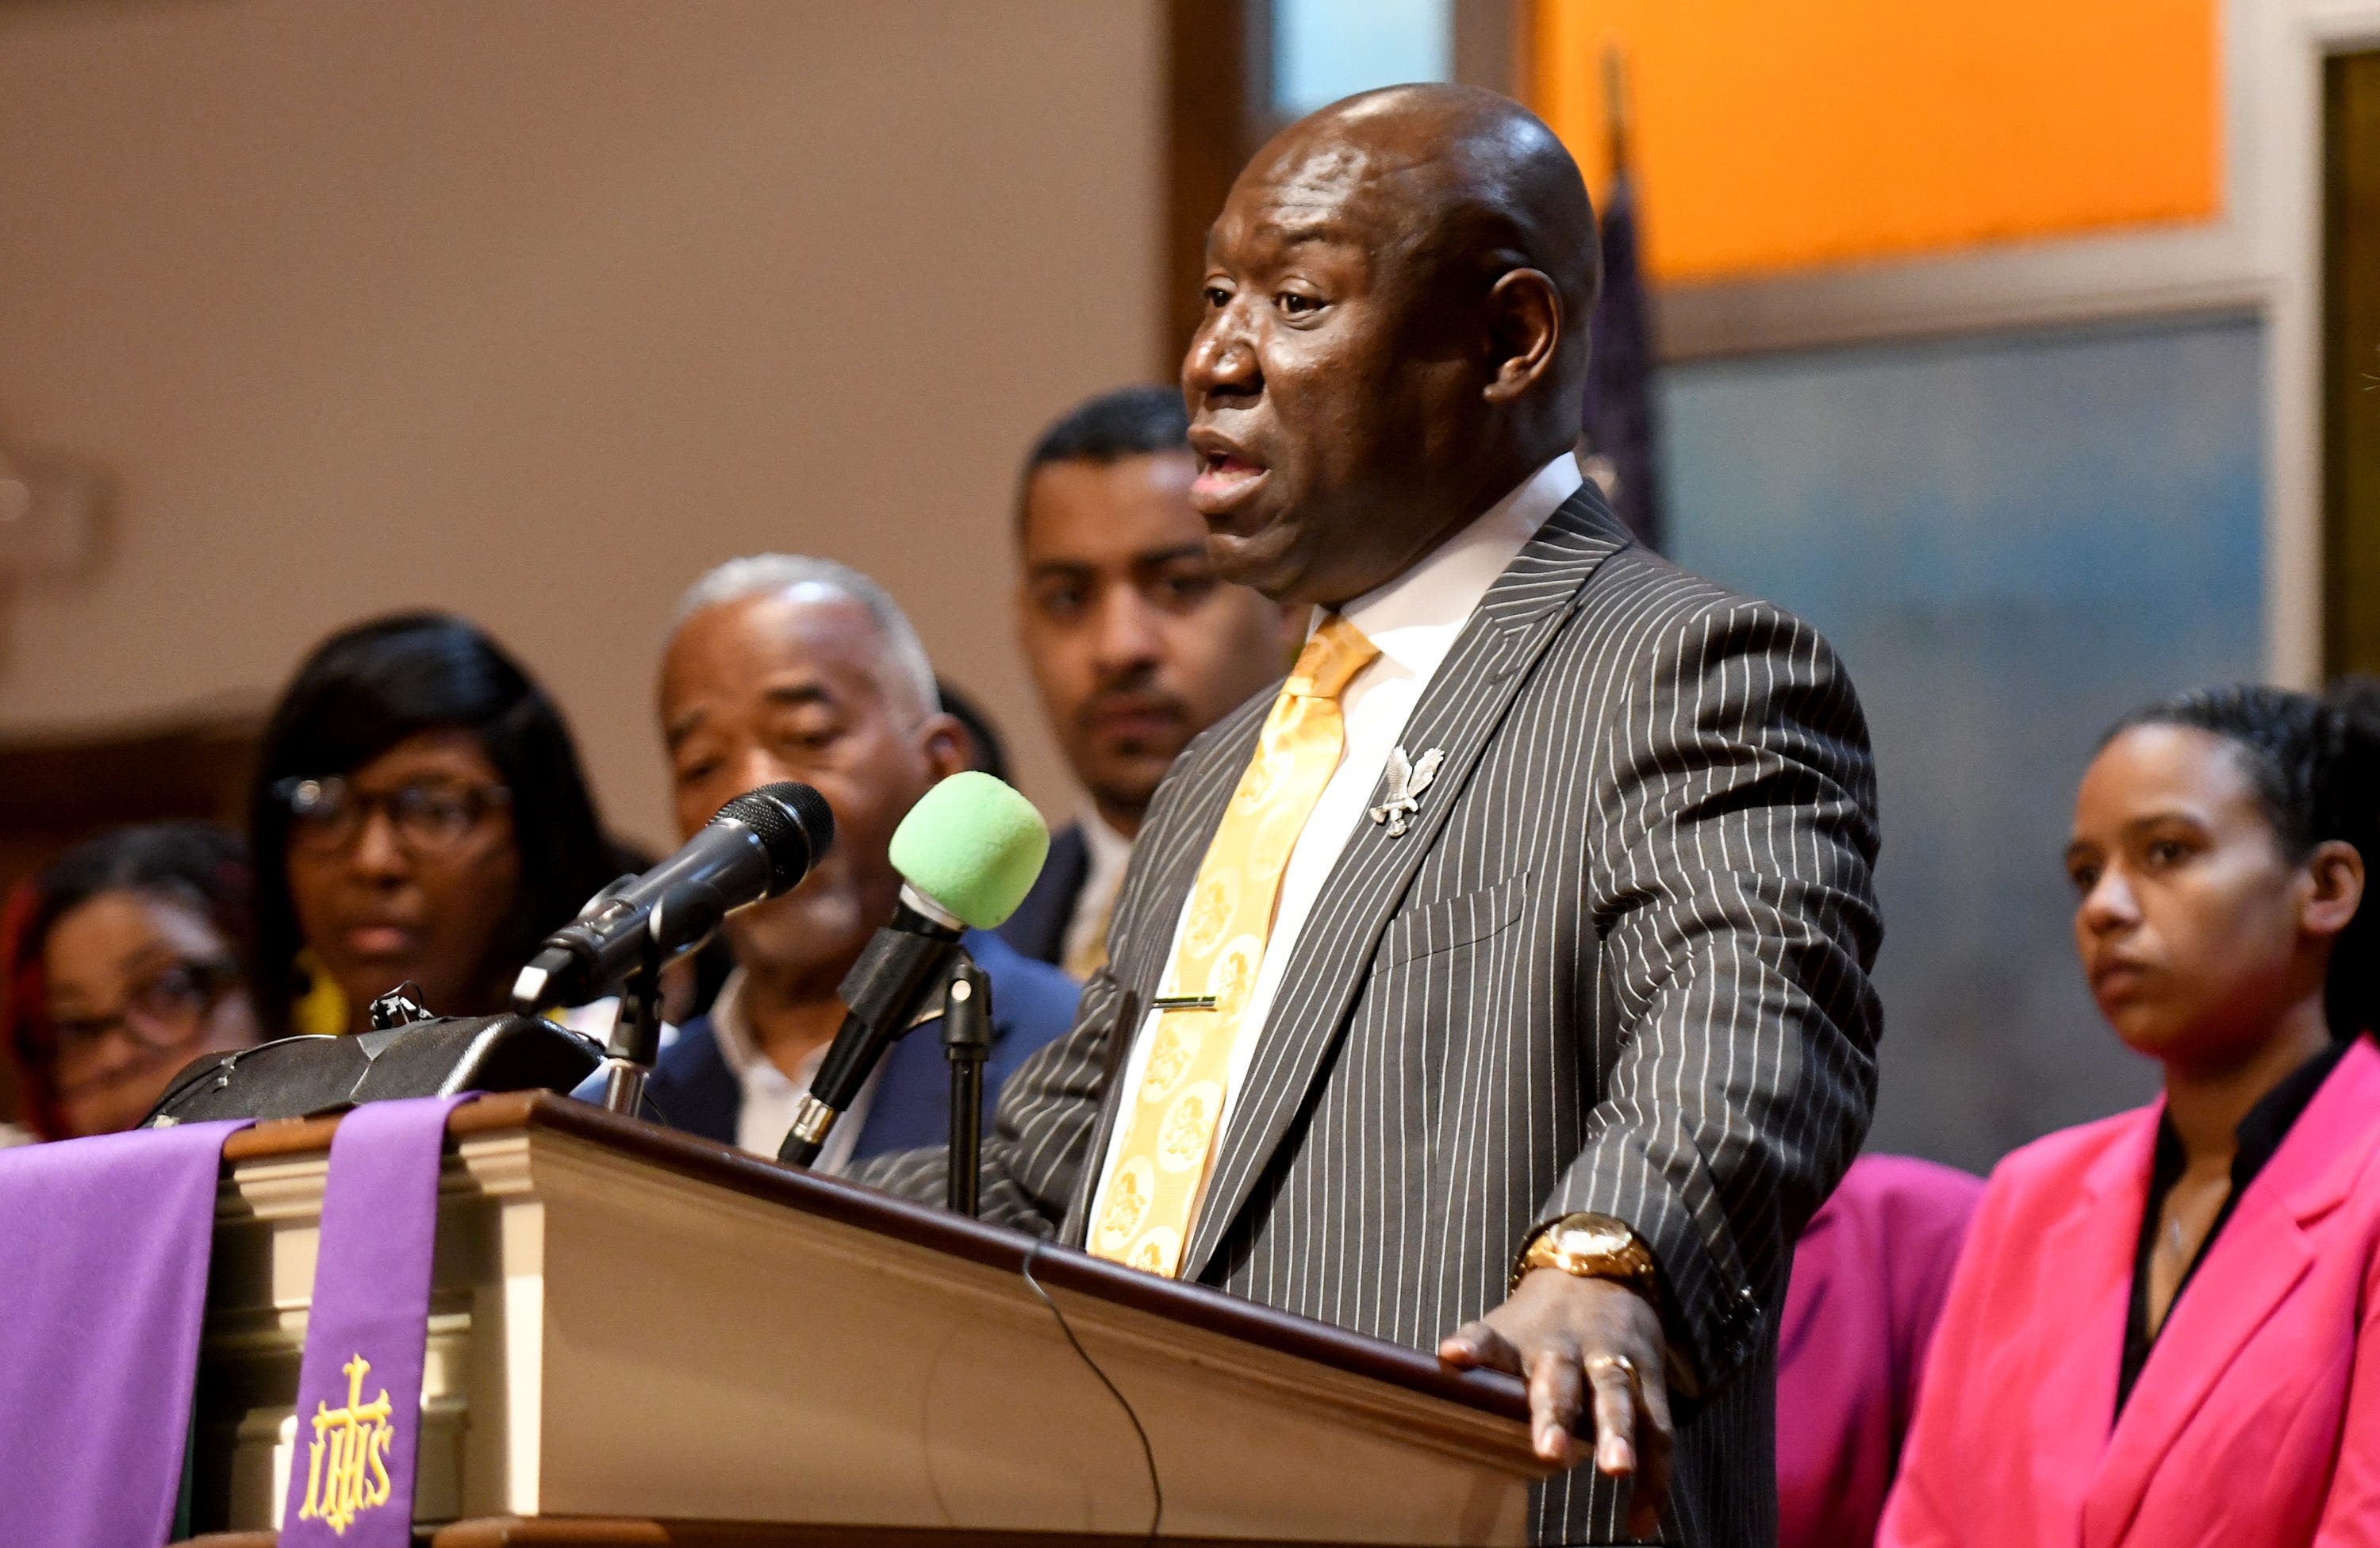 'Police entered wrong apartment': Ben Crump takes case of airmen killed by deputy. What we know